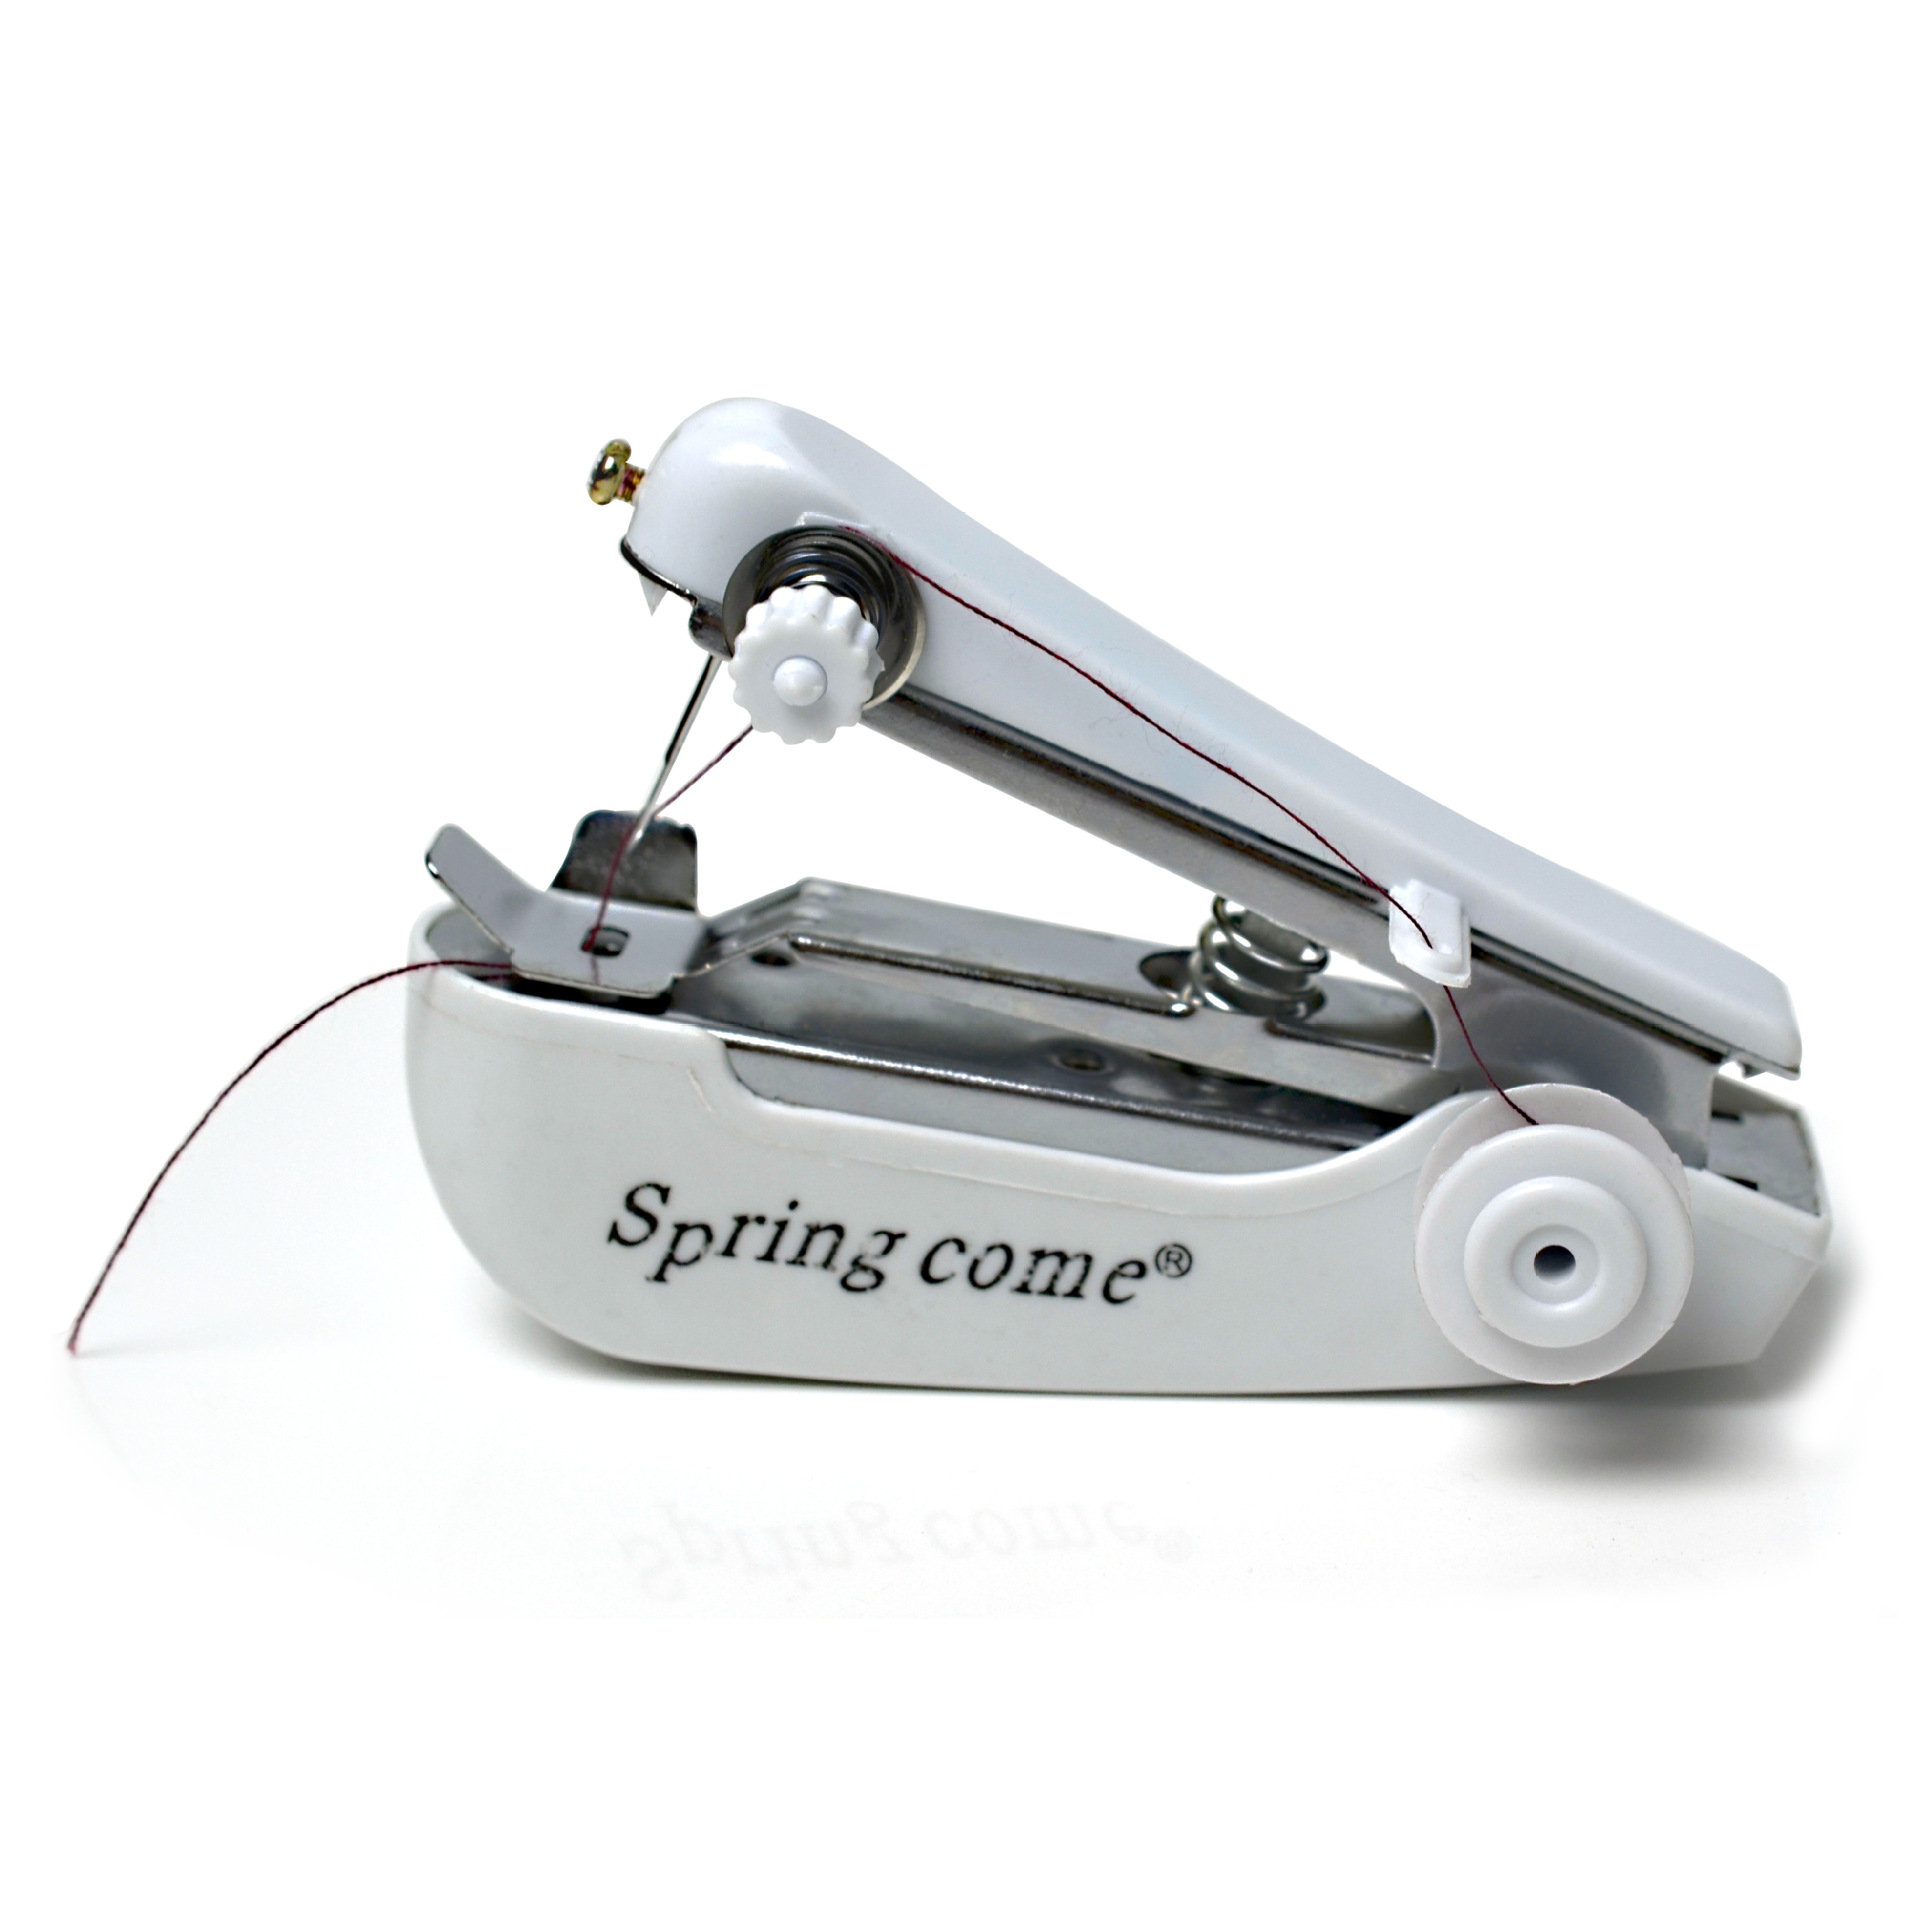 Manual Sewing Machine Springcome Mini Sewing Machine Creative Sewing Machine Running River Lake Cargo Source 105G